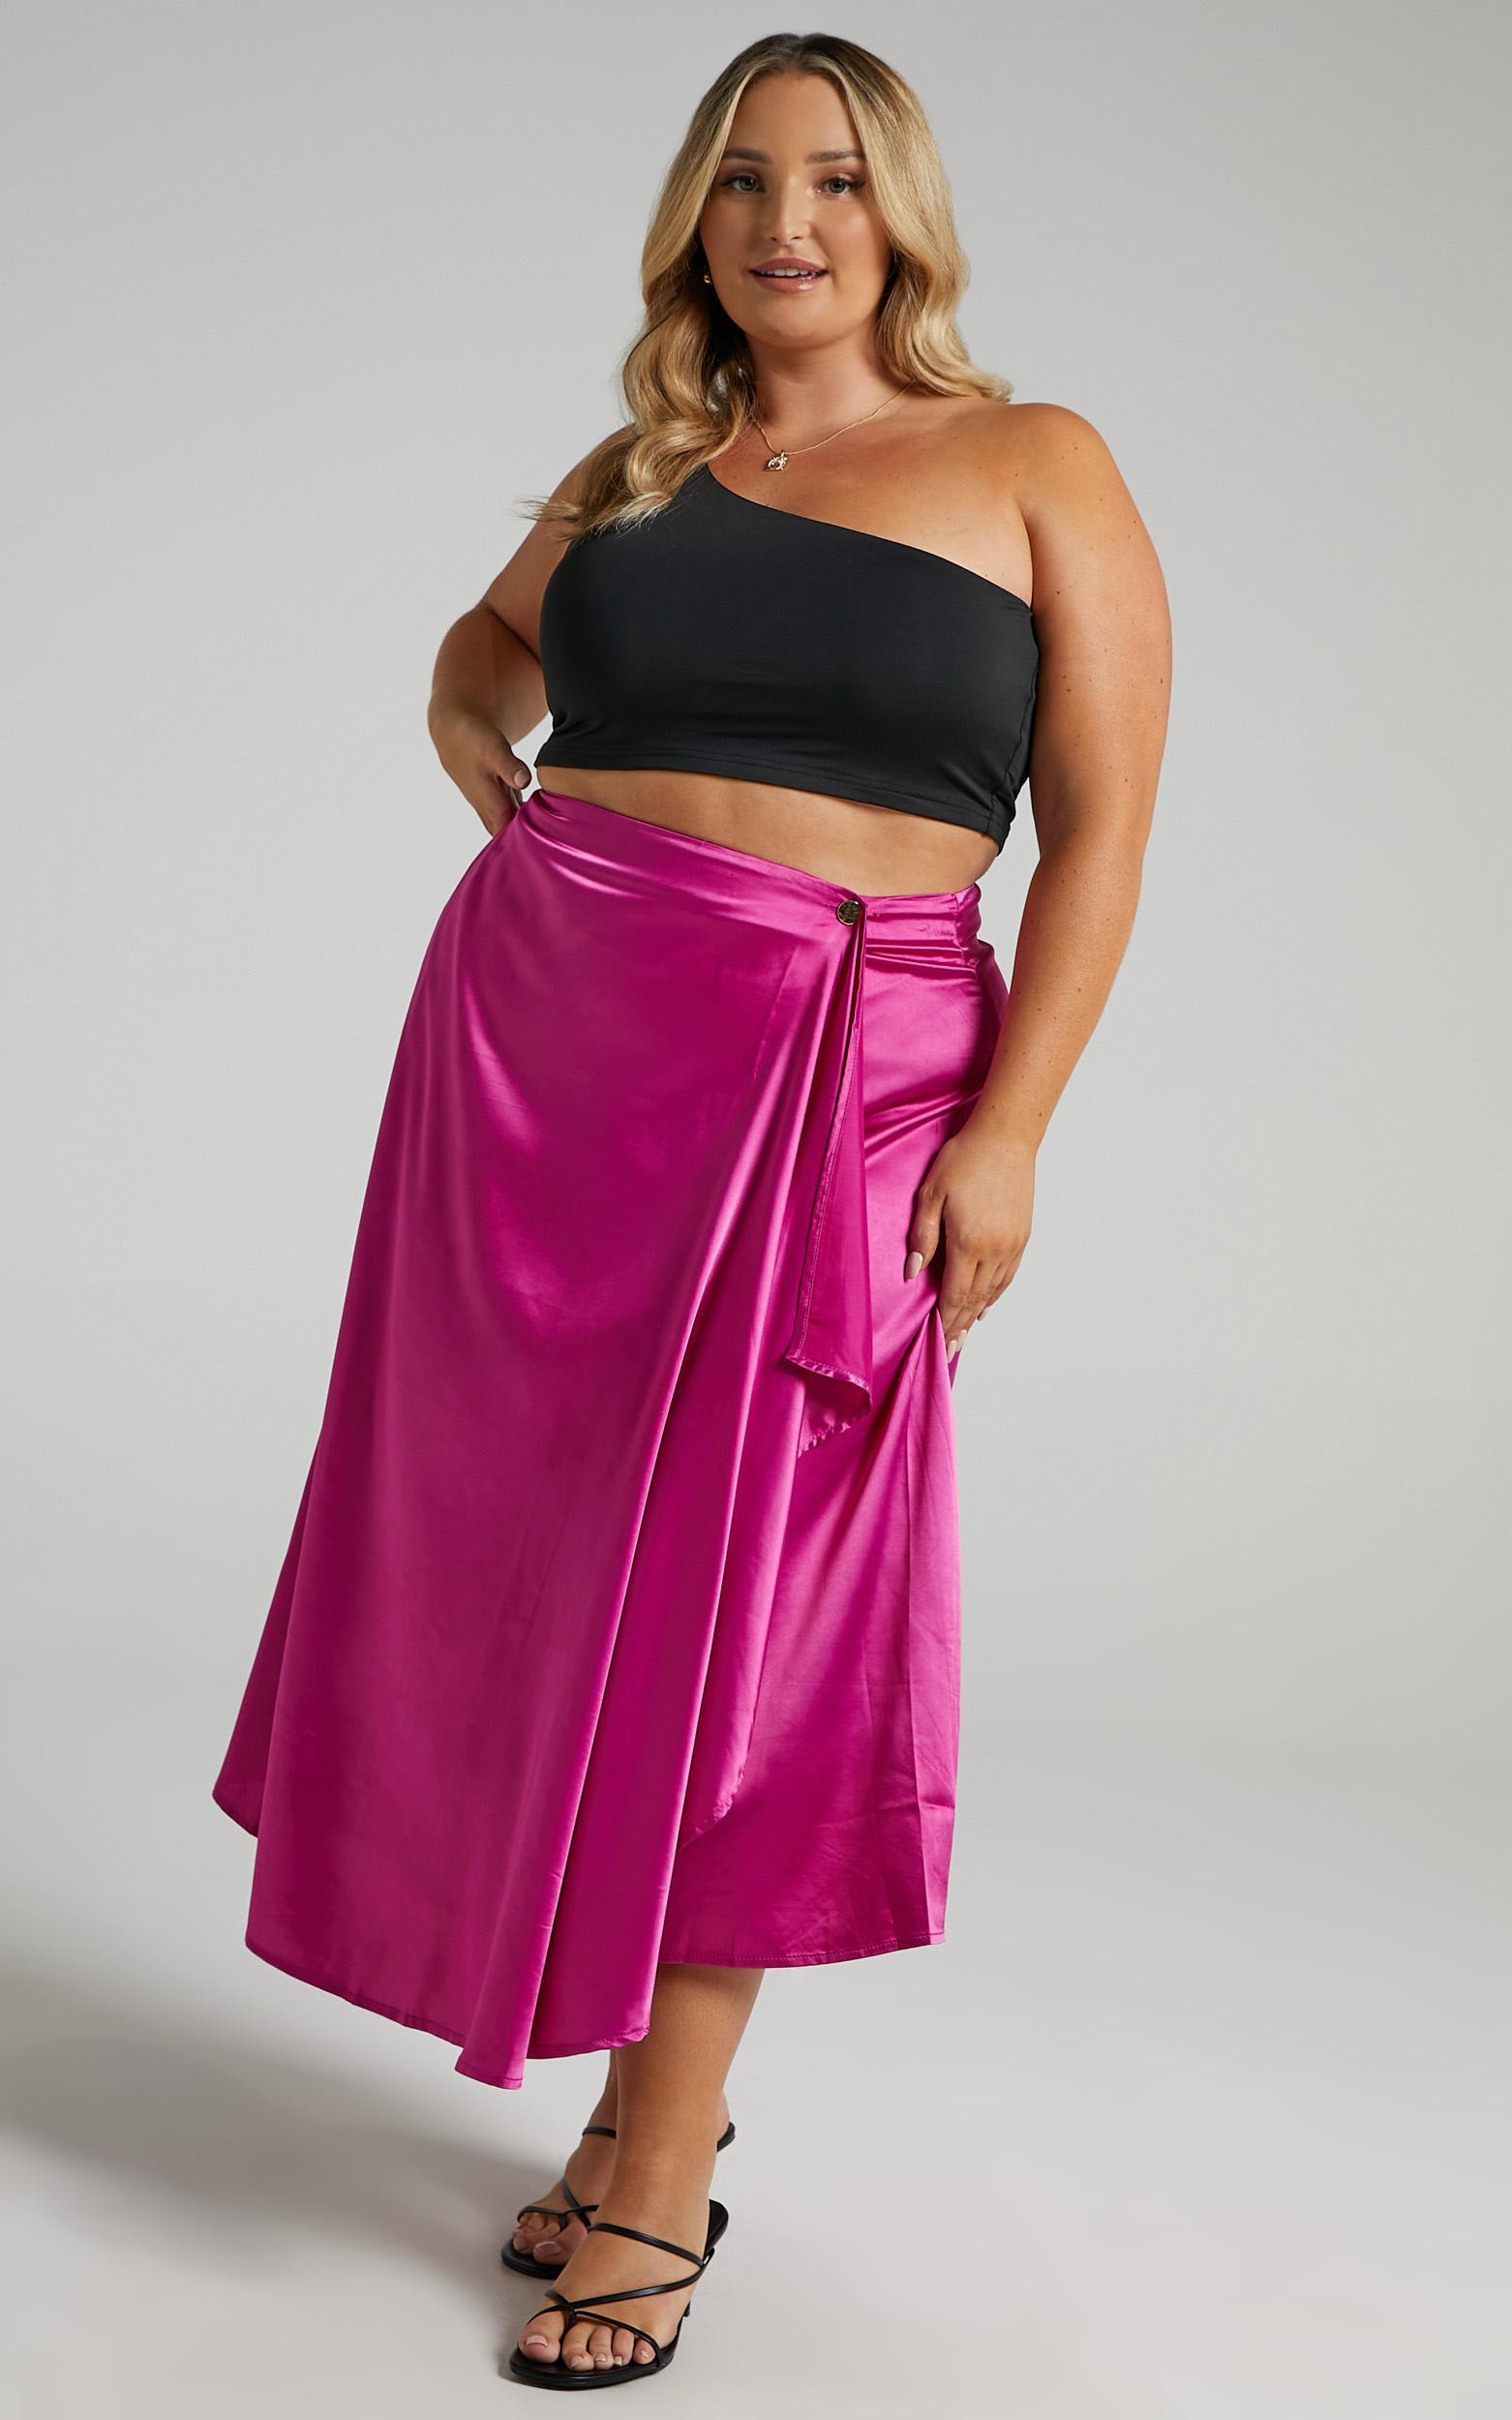 Eowyn Skirt in Pink Satin - 06, PNK1, hi-res image number null